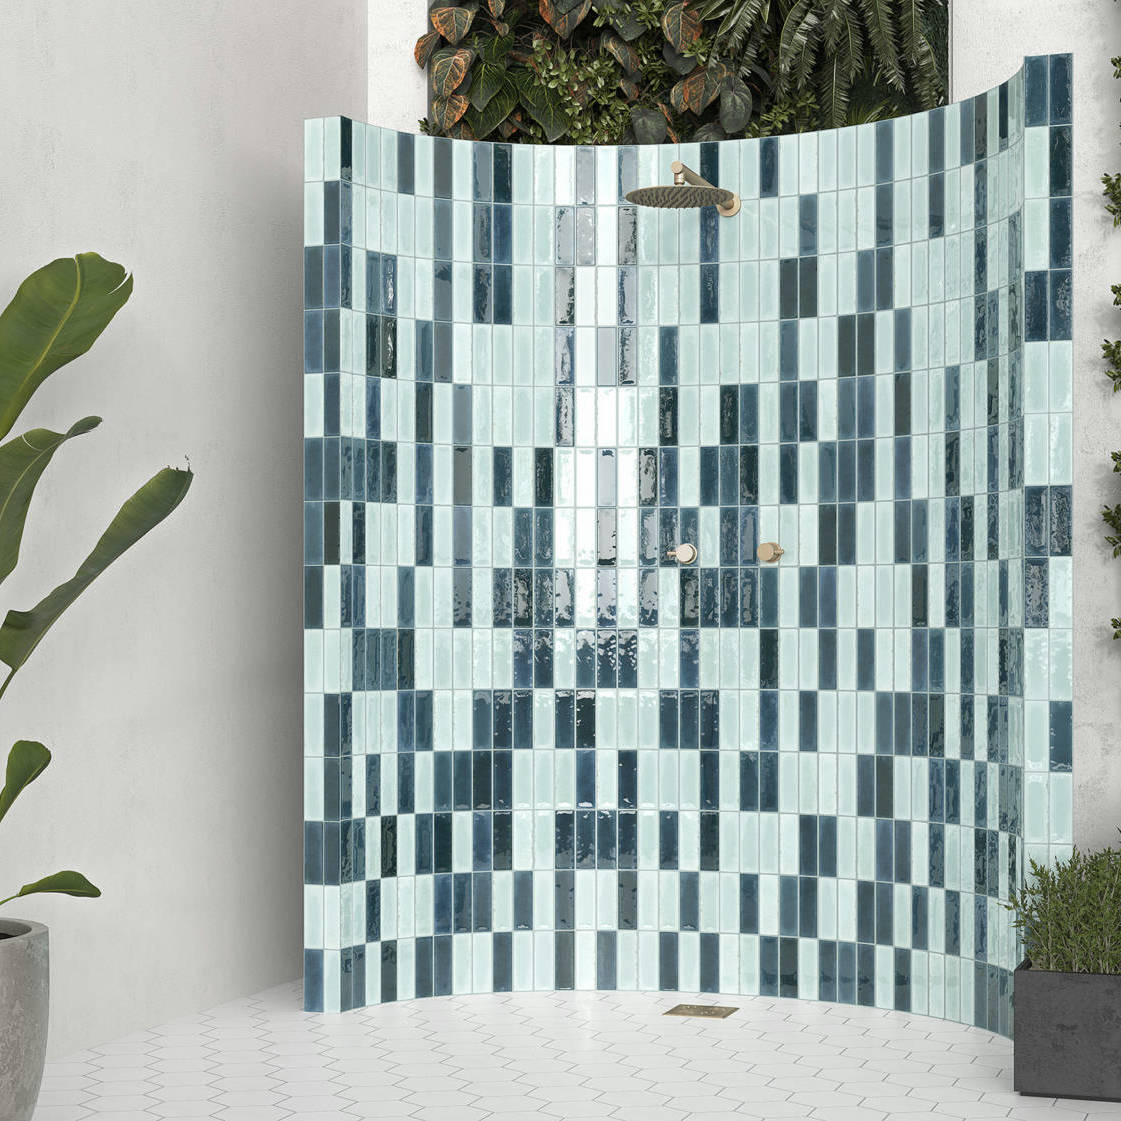 Calpe_3_G | Stones And More | Finest selection of Mosaics, Glass, Tile and Stone